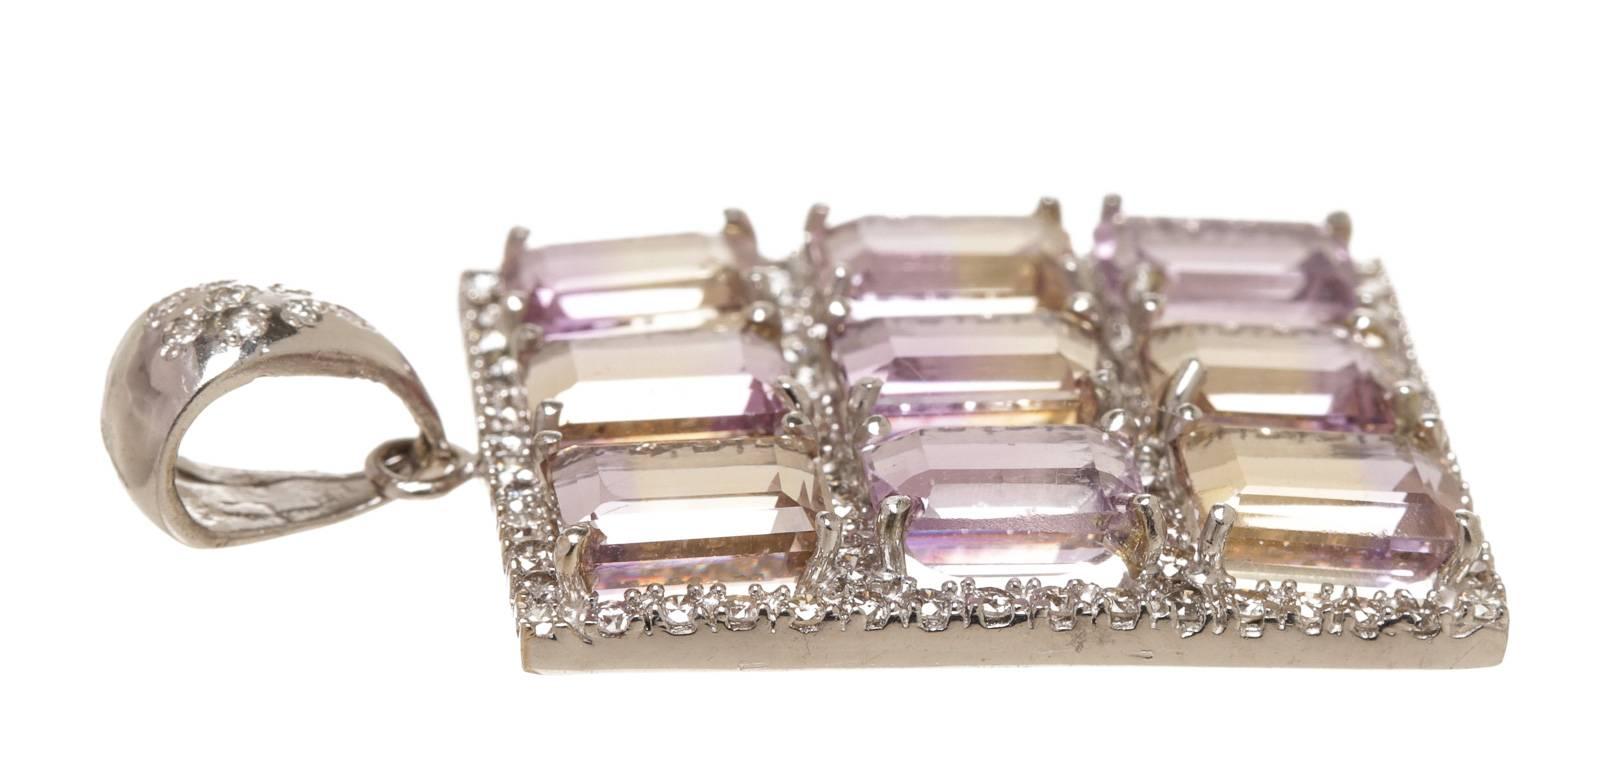 Featured here is this gorgeous 18k White Gold, Ametrine, and Diamond Pendant. This pendant weighs approximately 11.7 grams and is custom cast. It is styled in a traditional style with a bright finish. It measures approximately 42mm x 24mm. Prong set